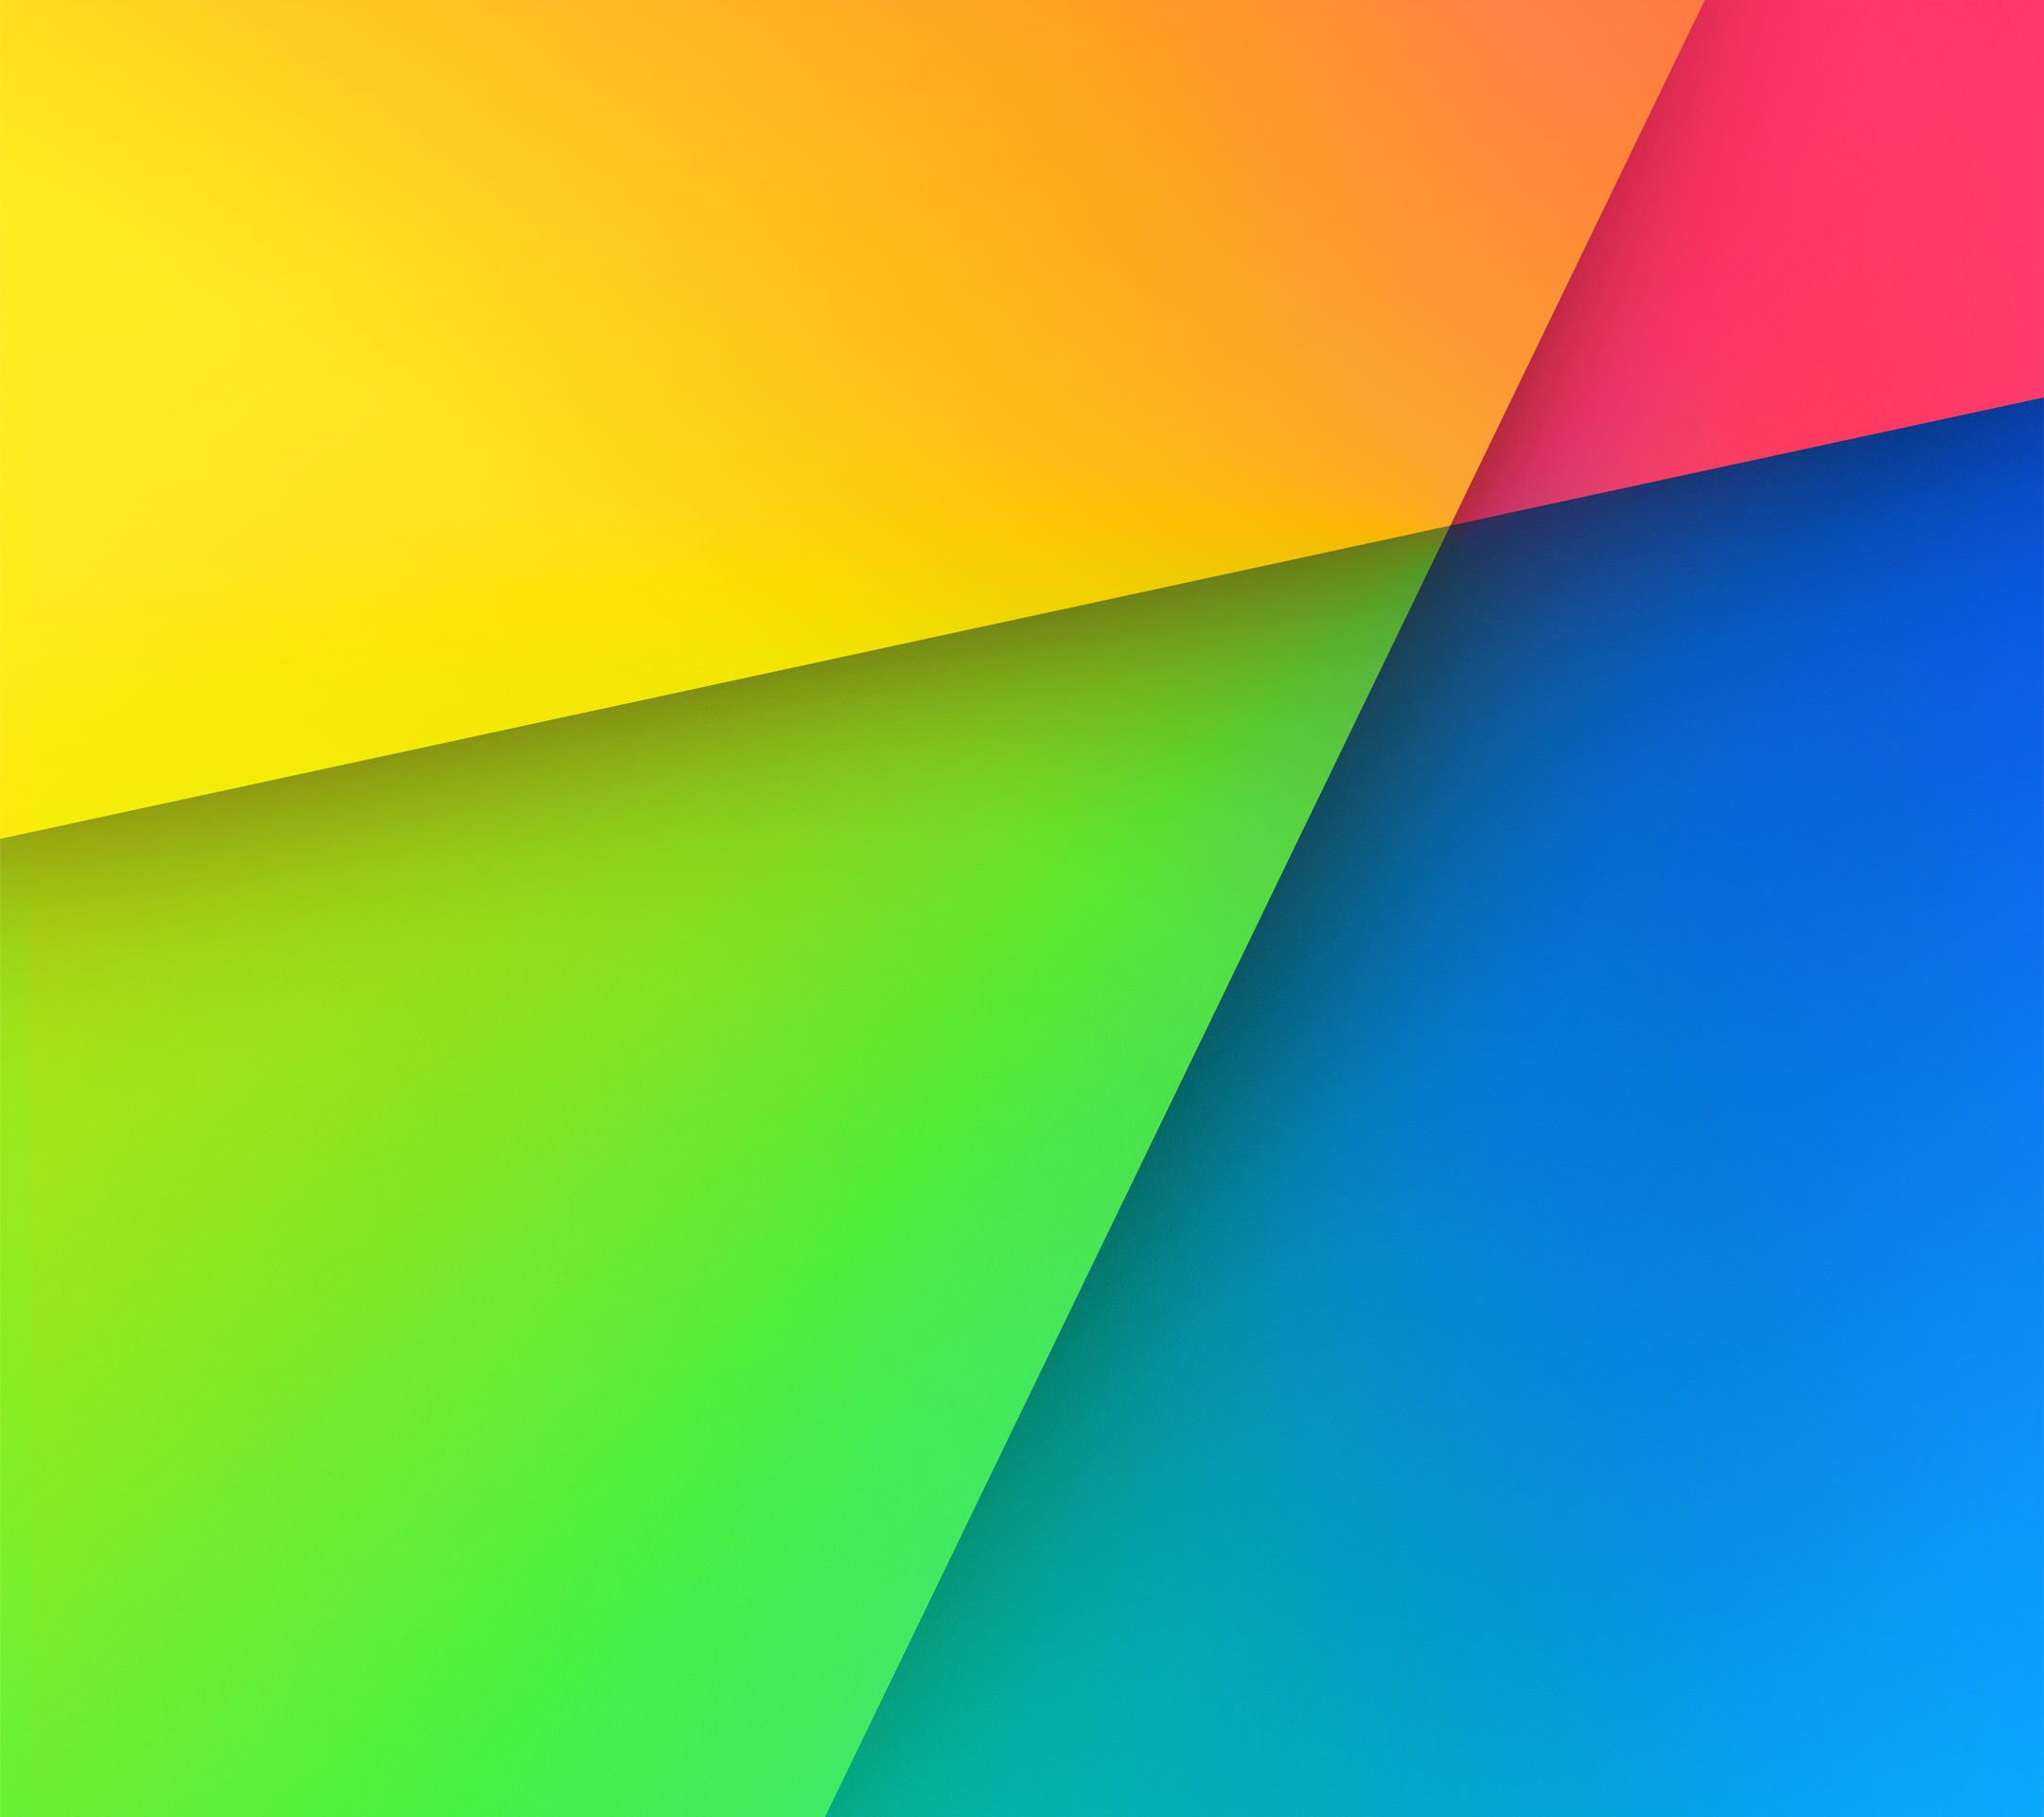 Colorful red, green and blue yellow | wallpaper.sc SmartPhone